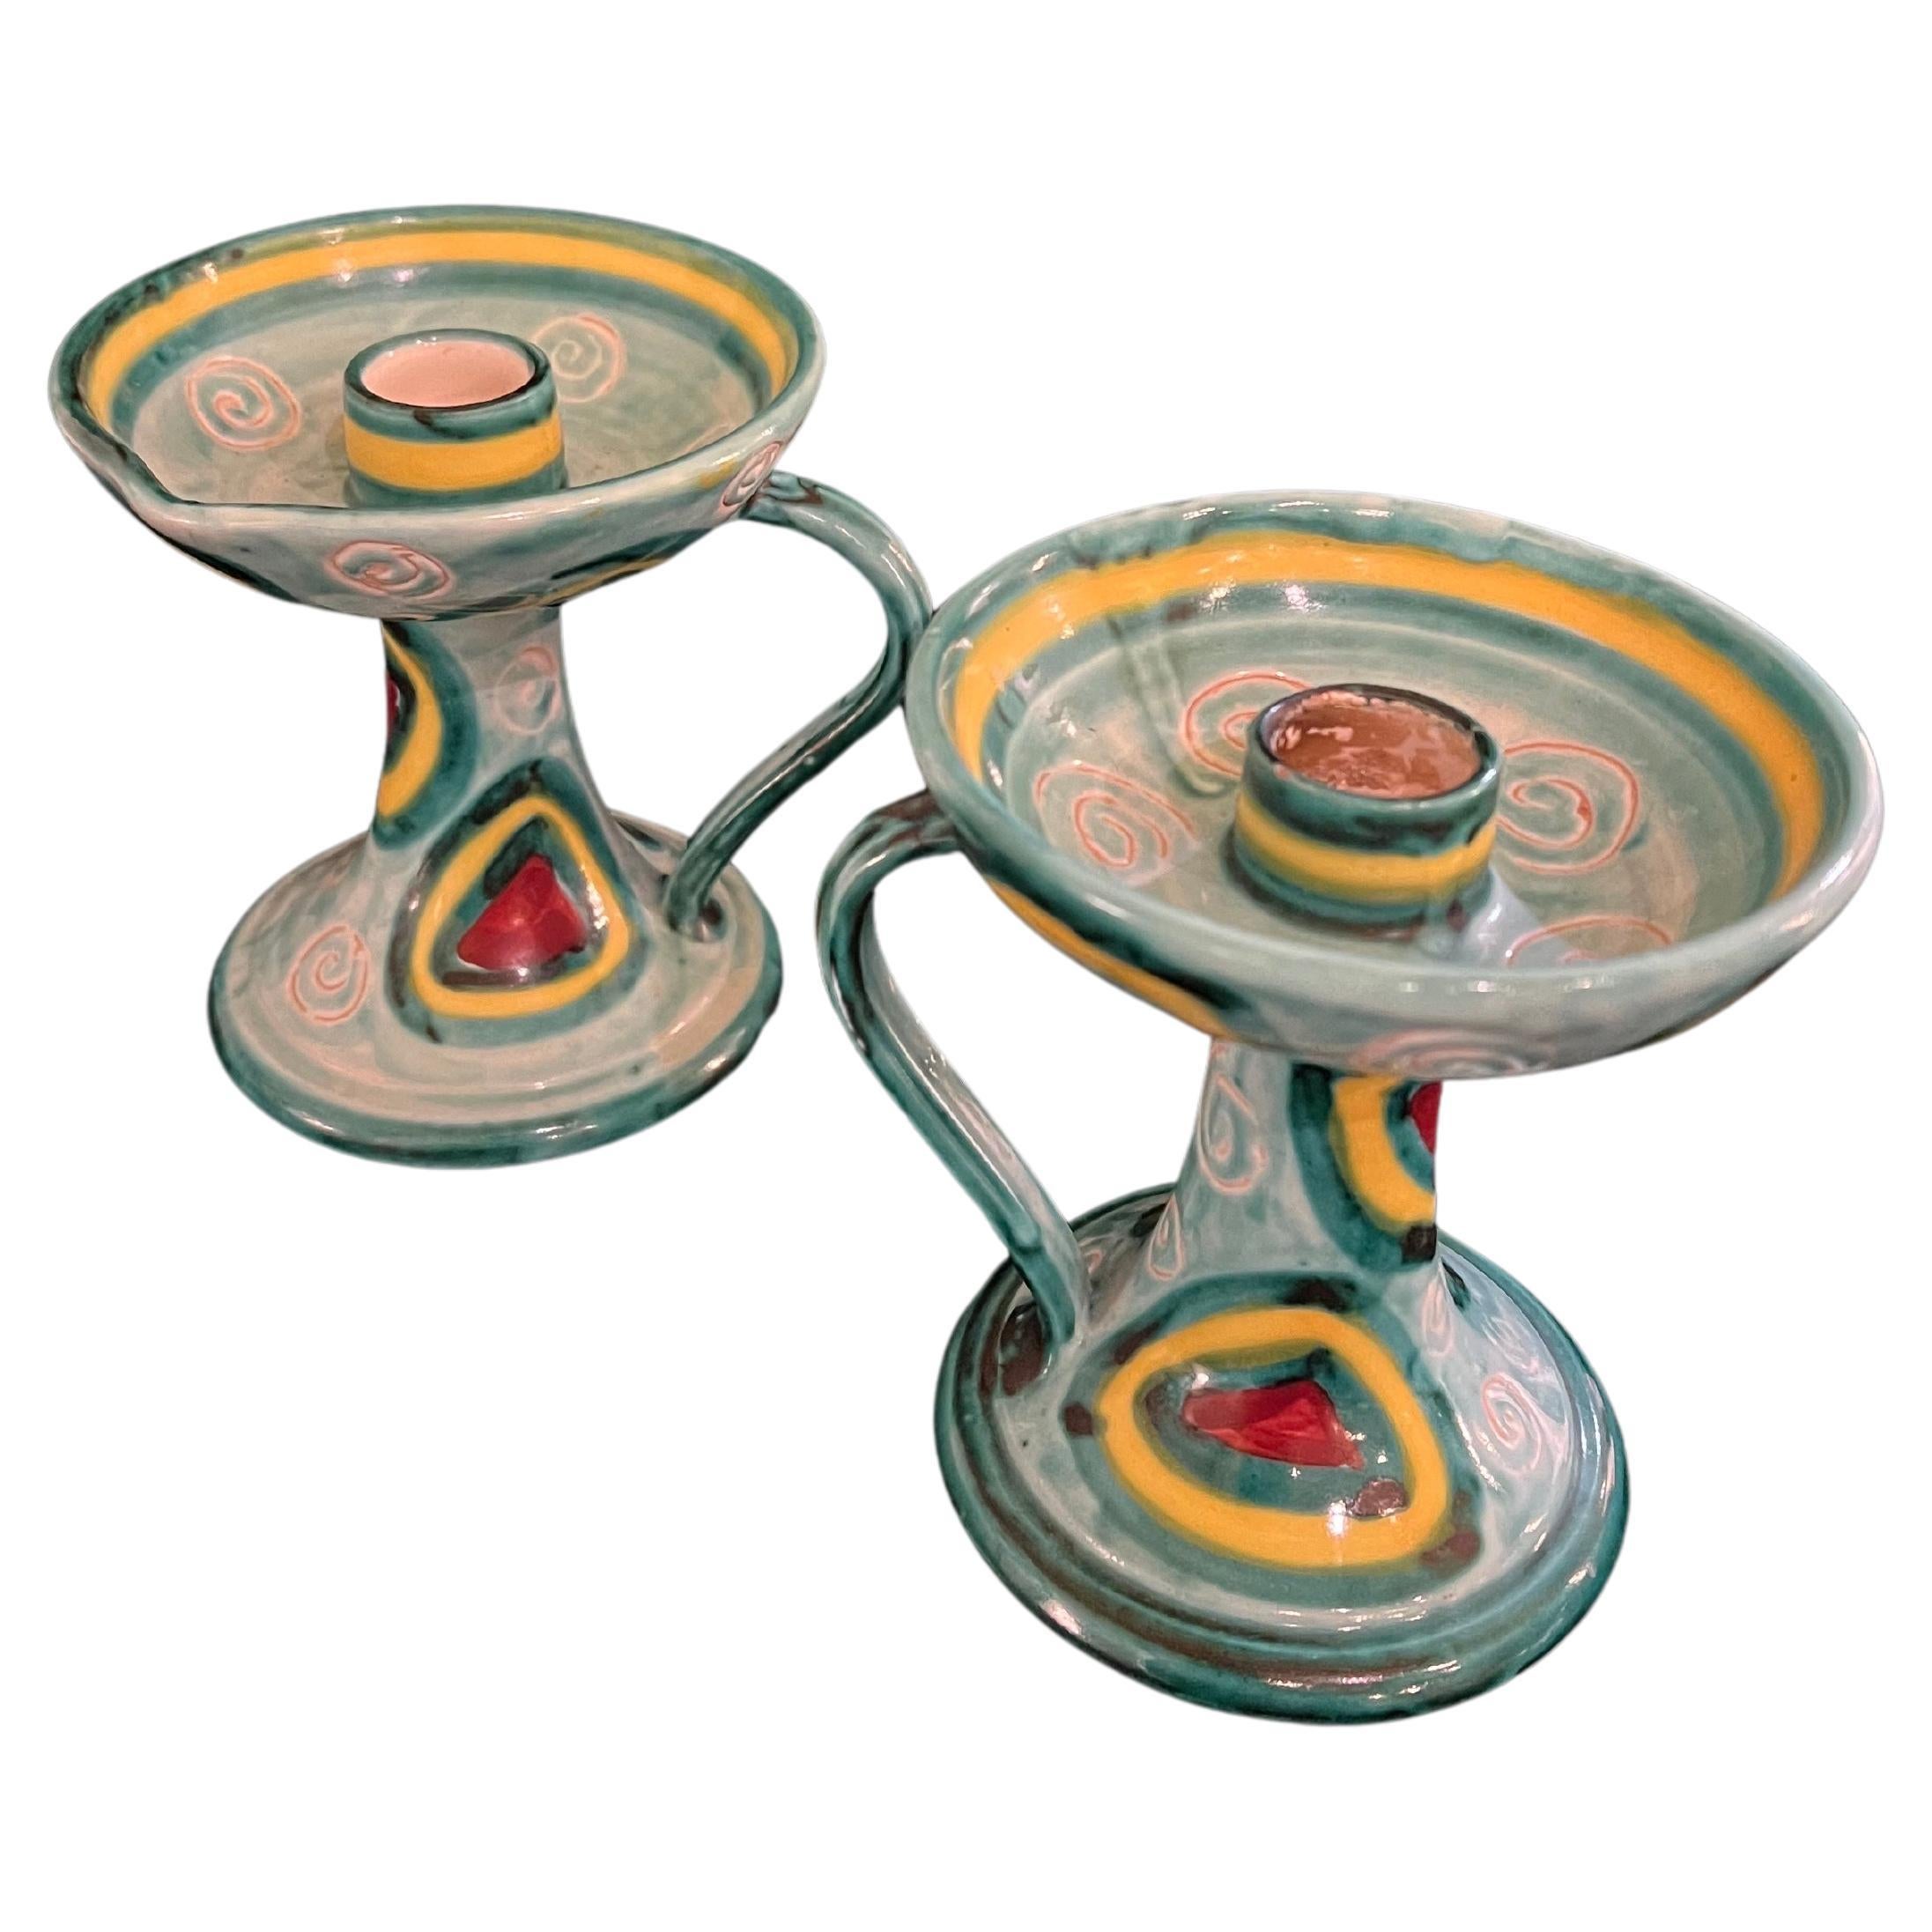 Beautiful pair of Italian ceramic candle holders in excellent condition no chips or cracks, circa 1950's stamped at the bottom PE. Beautiful colors and great design.